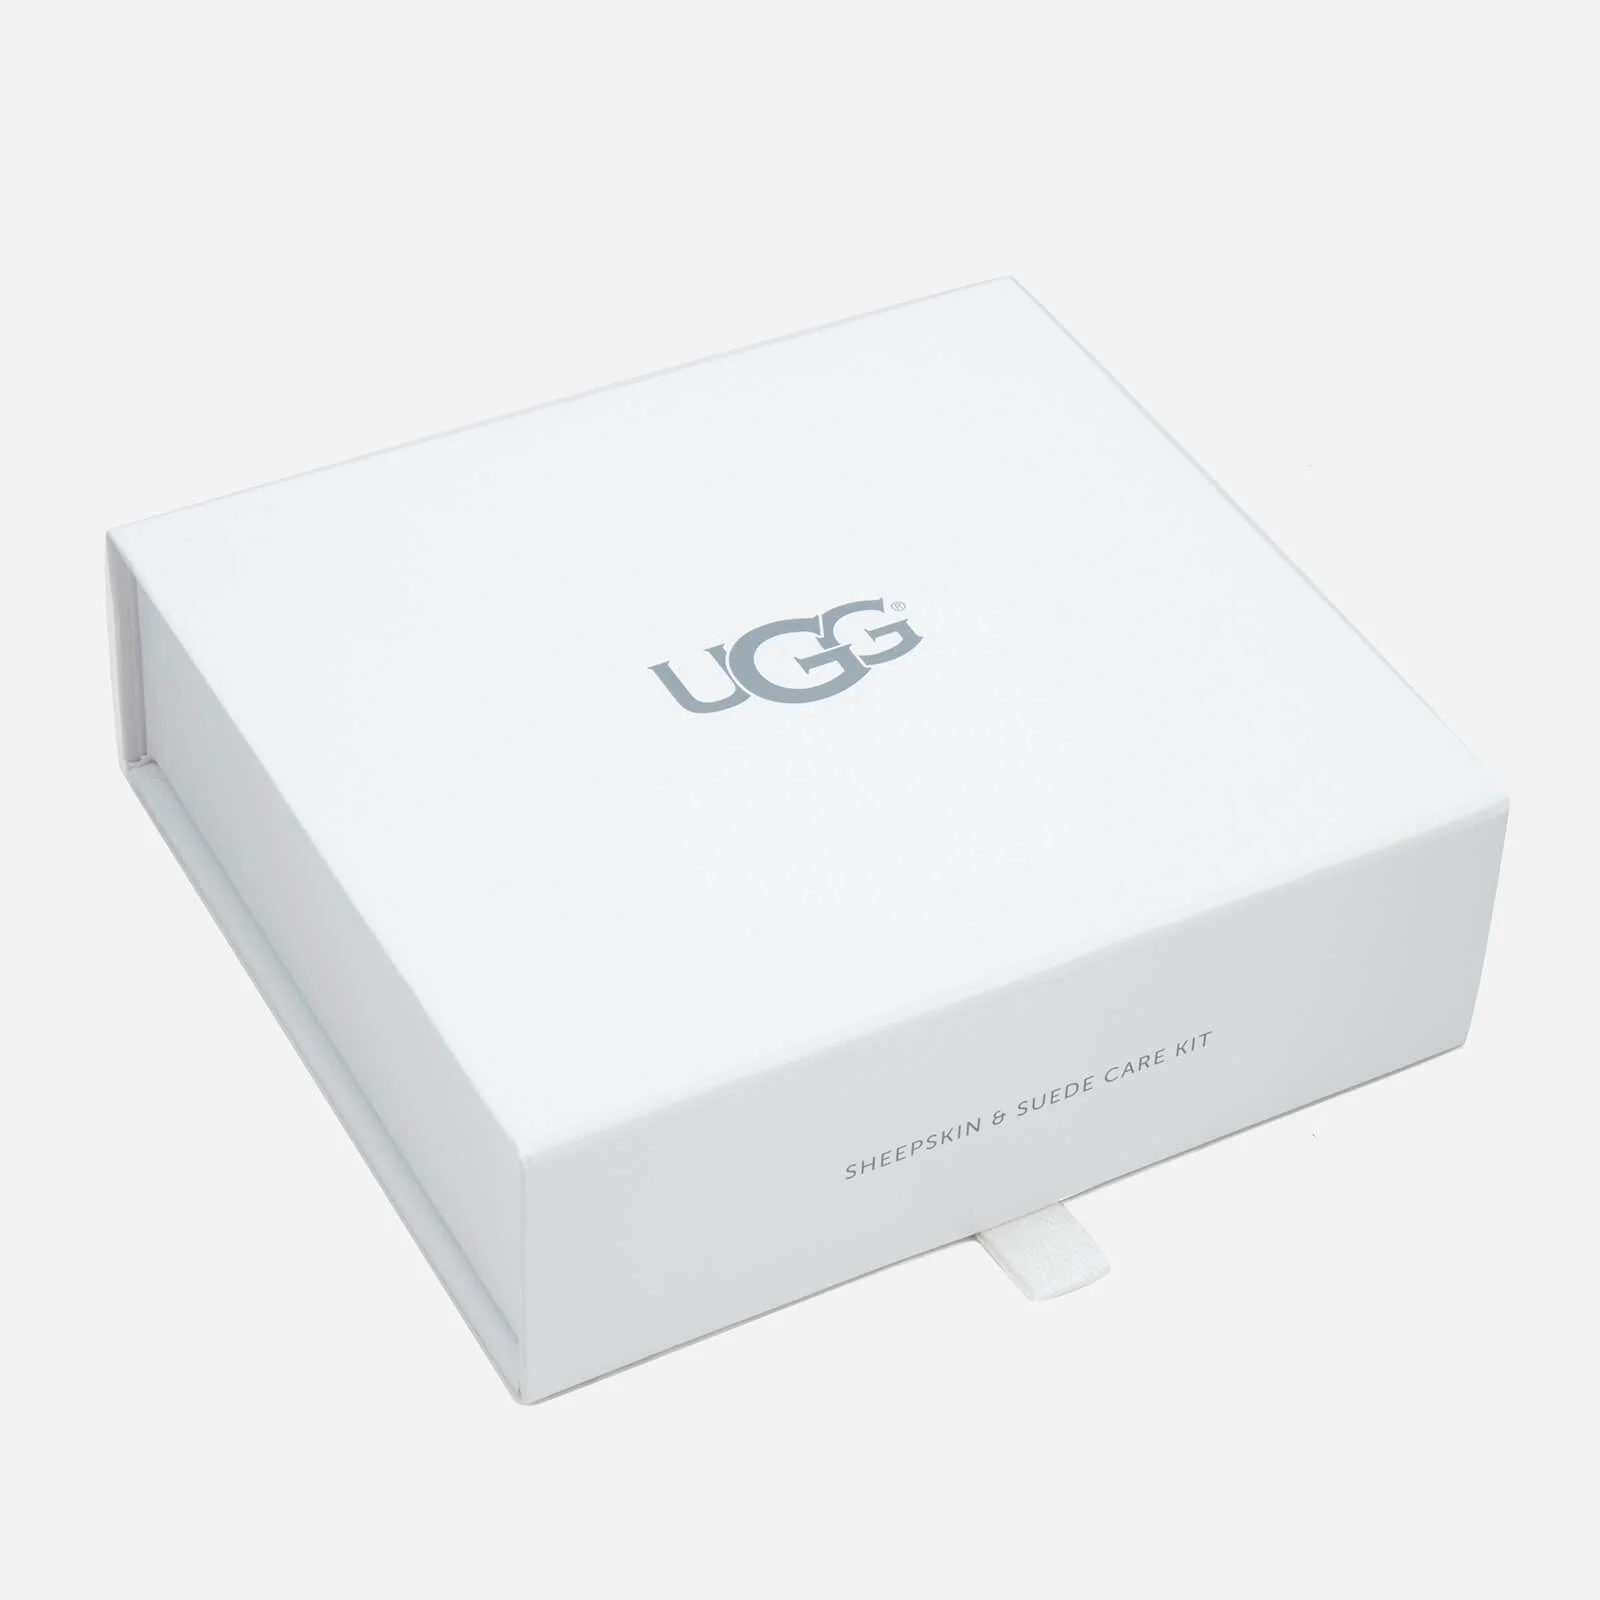 UGG Care kit – The UGG Store